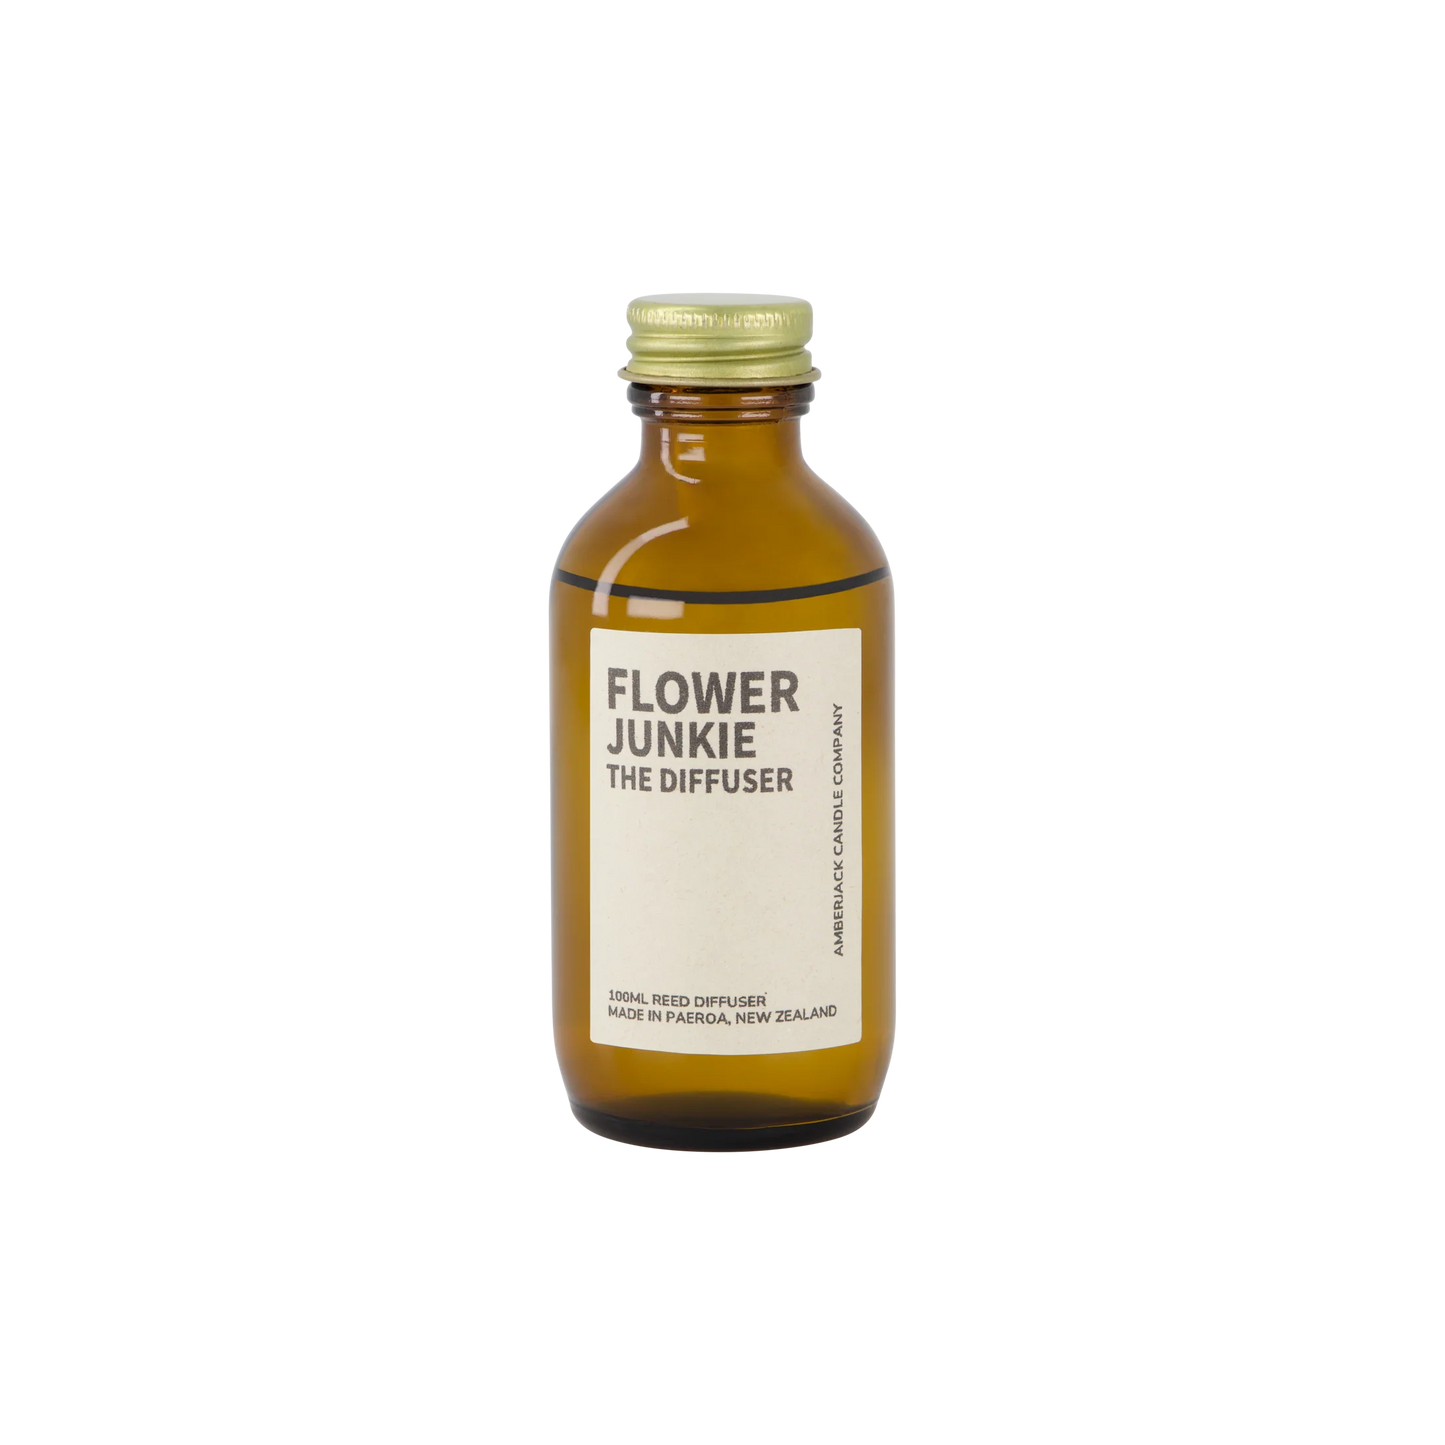 Flower Junkie - The Diffuser